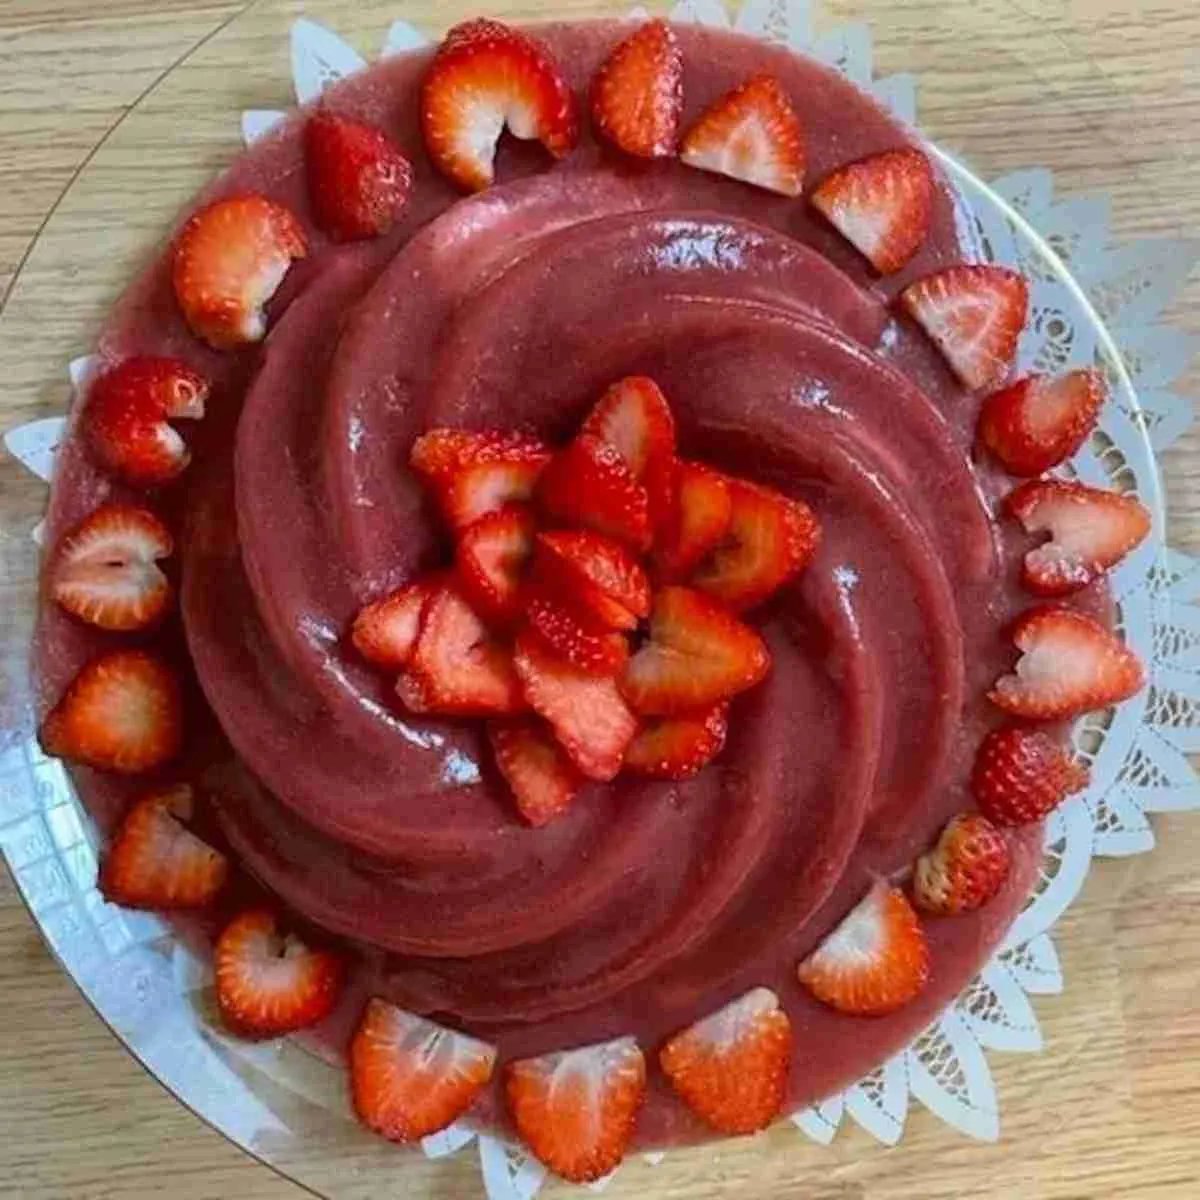 Homemade sugar-free strawberry jello cake with strawberries in the middle and on the sides made in a Nordic Ware Heritage Bundt Cake Pan